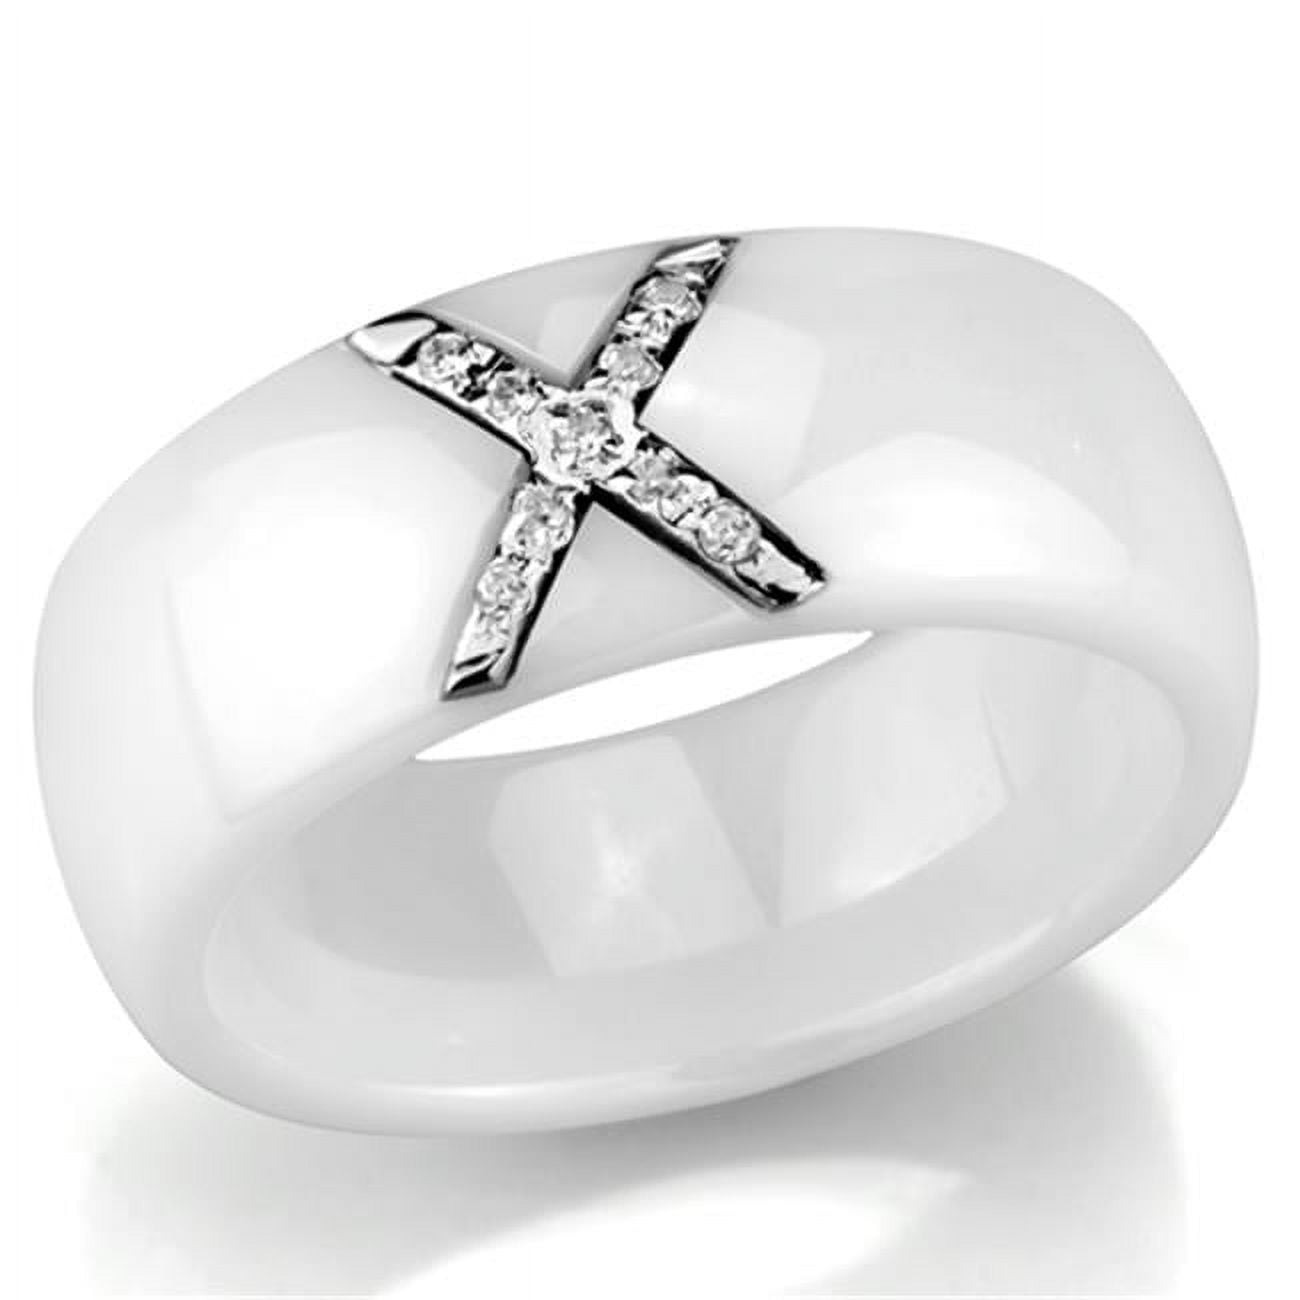 Picture of Alamode 3W948-6 Women High Polished Stainless Steel Ring with Ceramic in White - Size 6